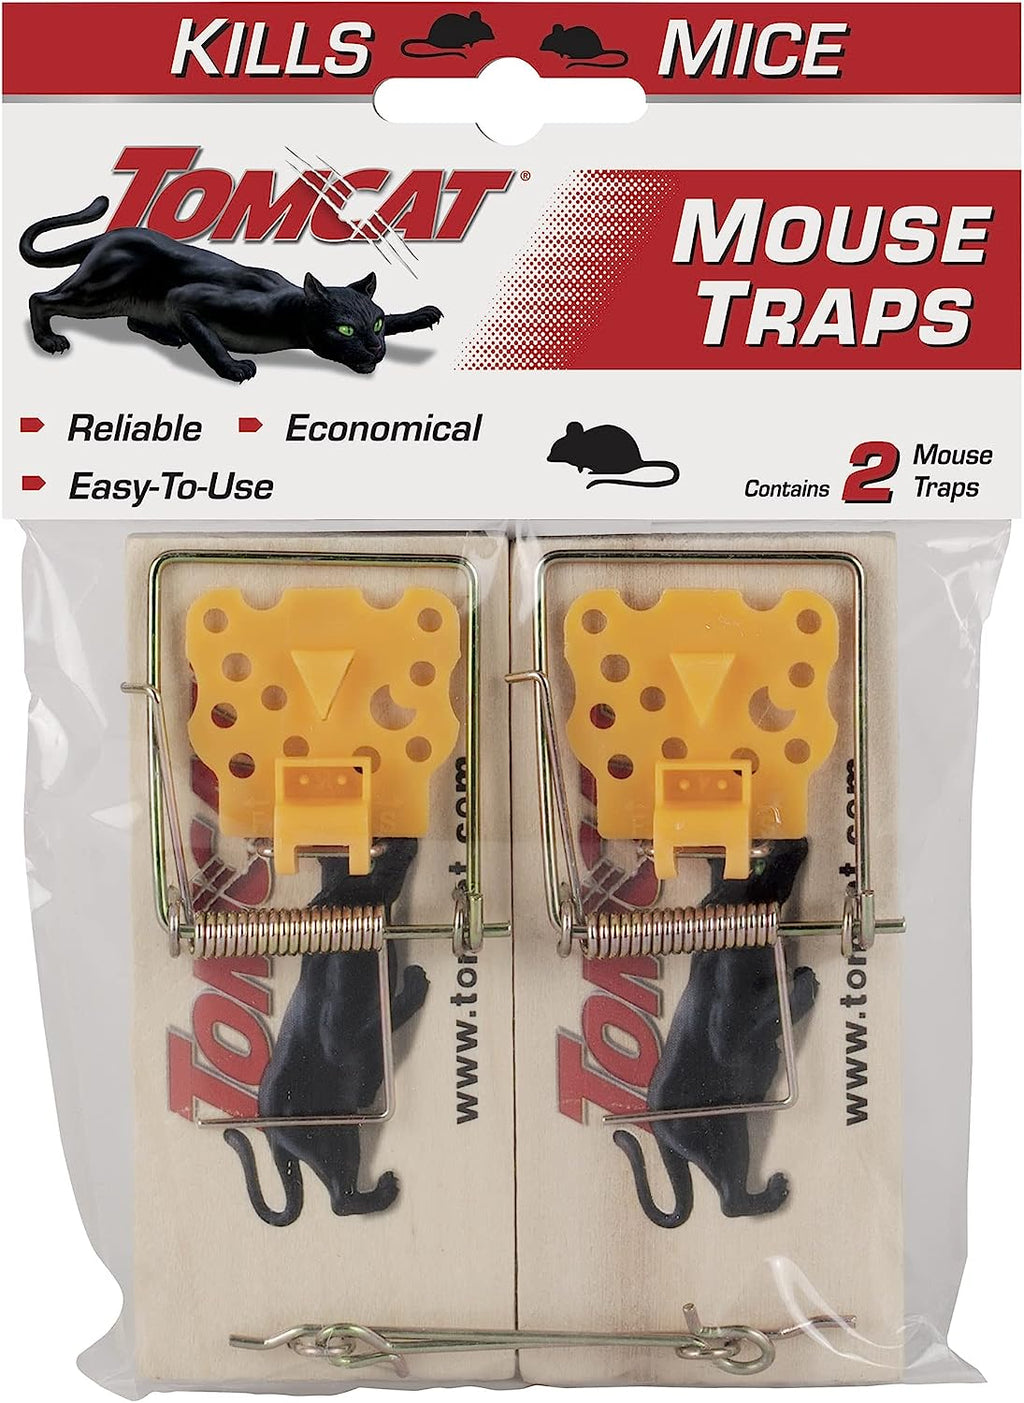 4 Wooden Mouse Traps | Quick Kill | Inexpensive & Effective